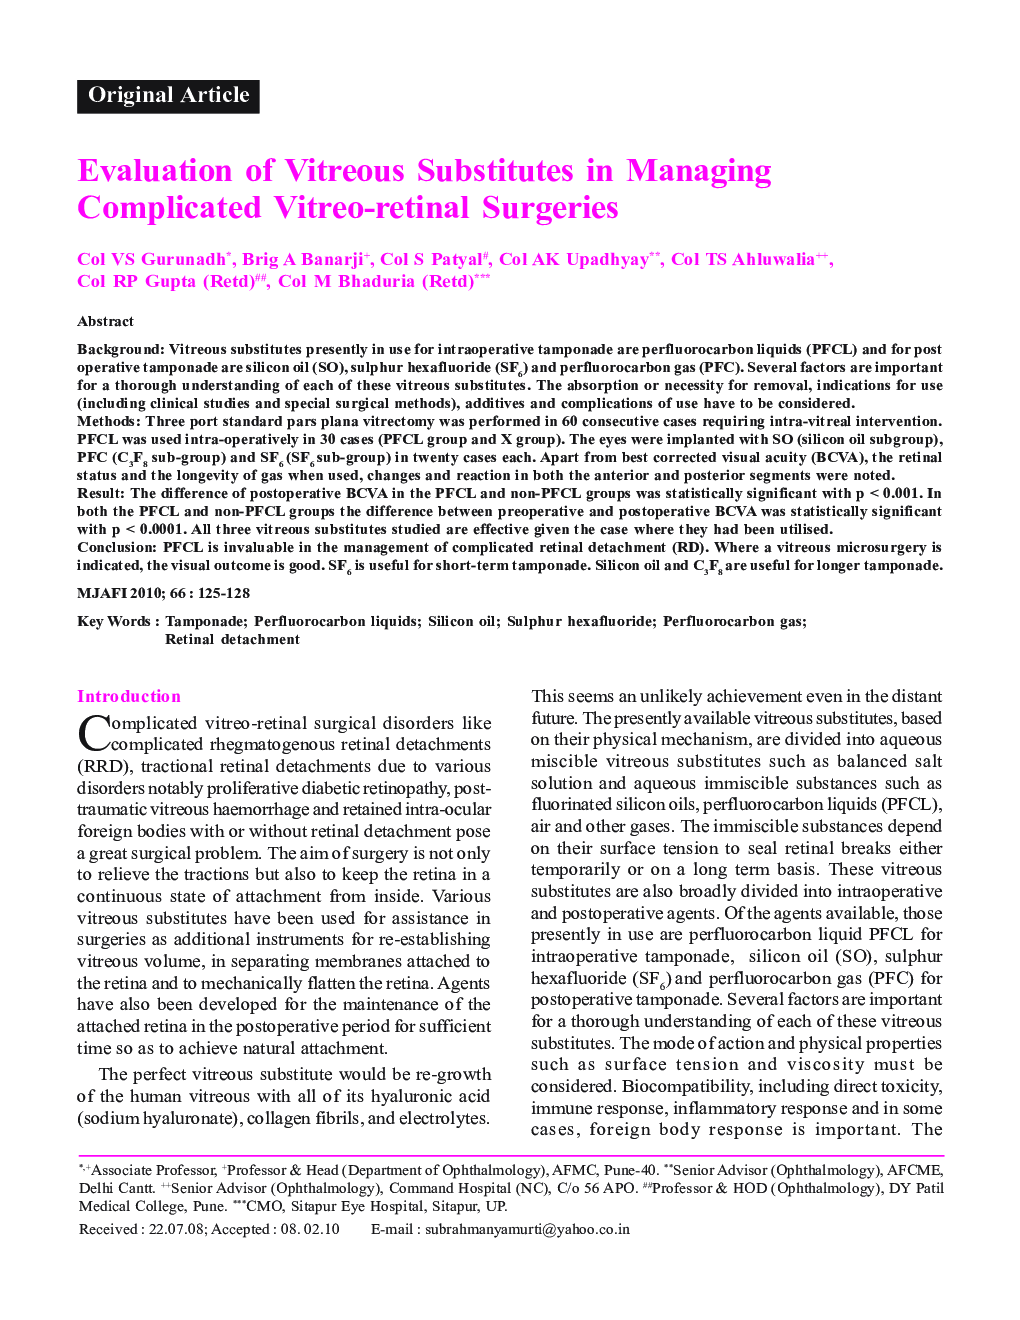 Evaluation of Vitreous Substitutes in Managing Complicated Vitreo-retinal Surgeries